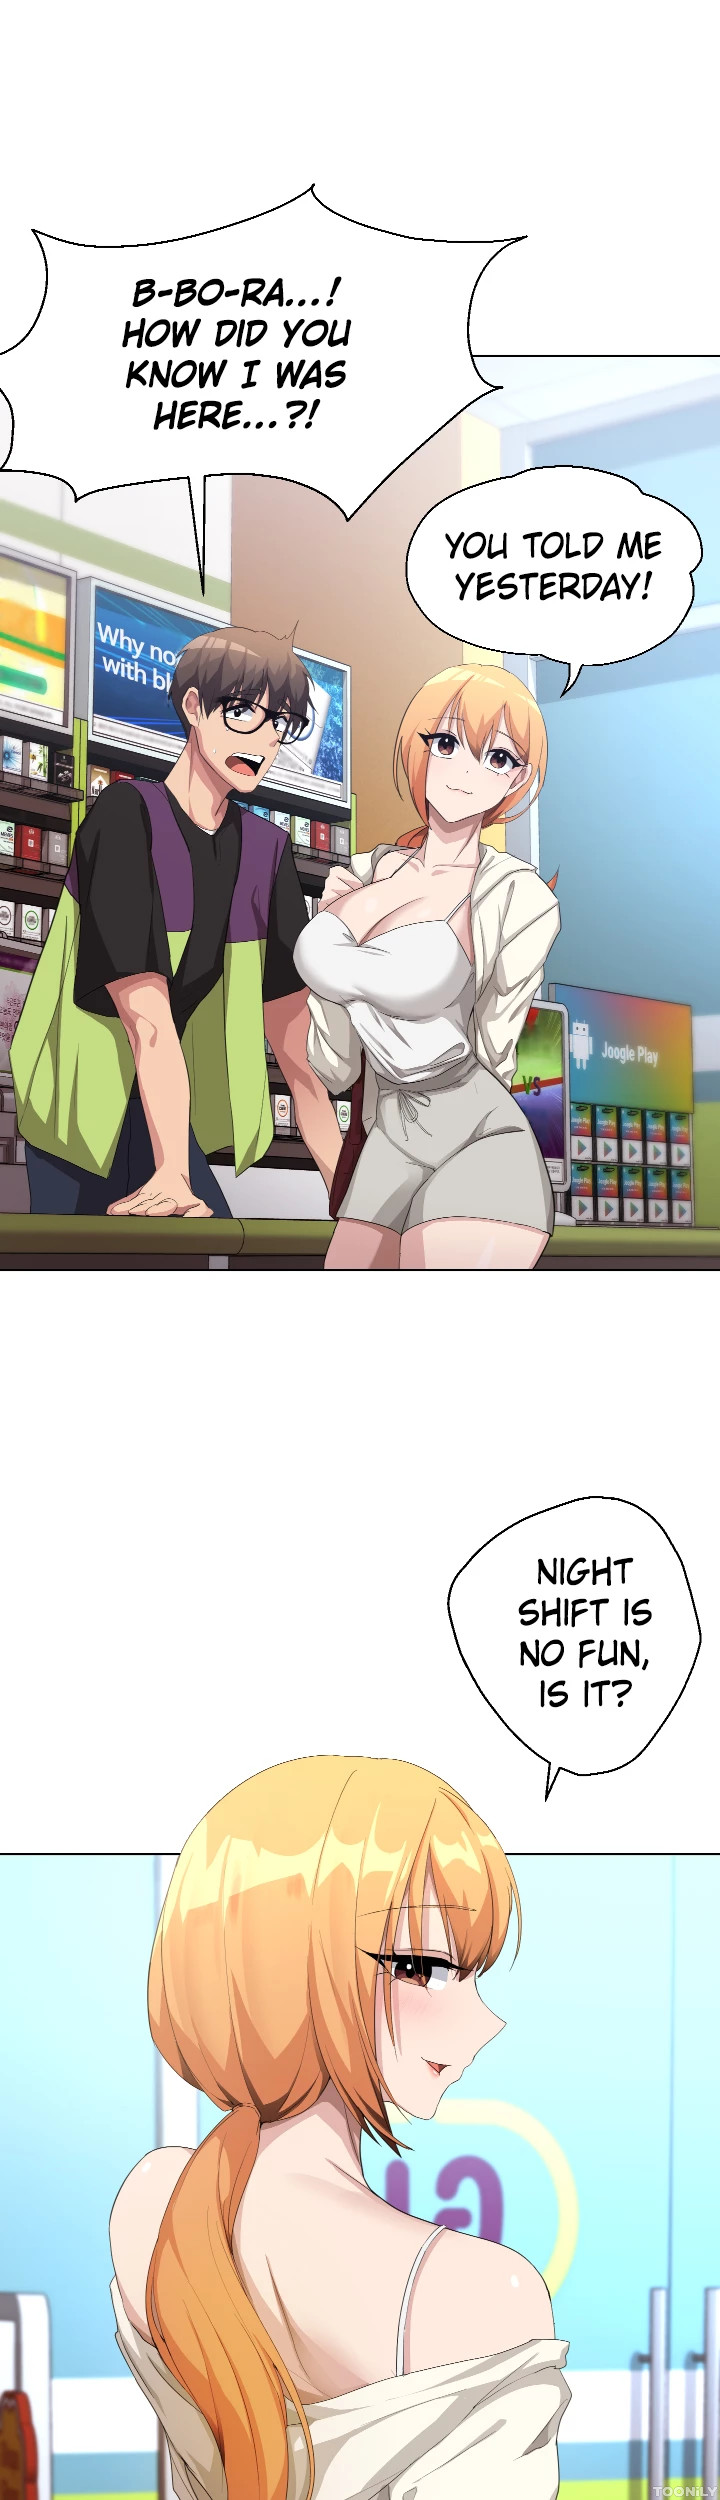 Girls I Used to Teach - Chapter 6 Page 21